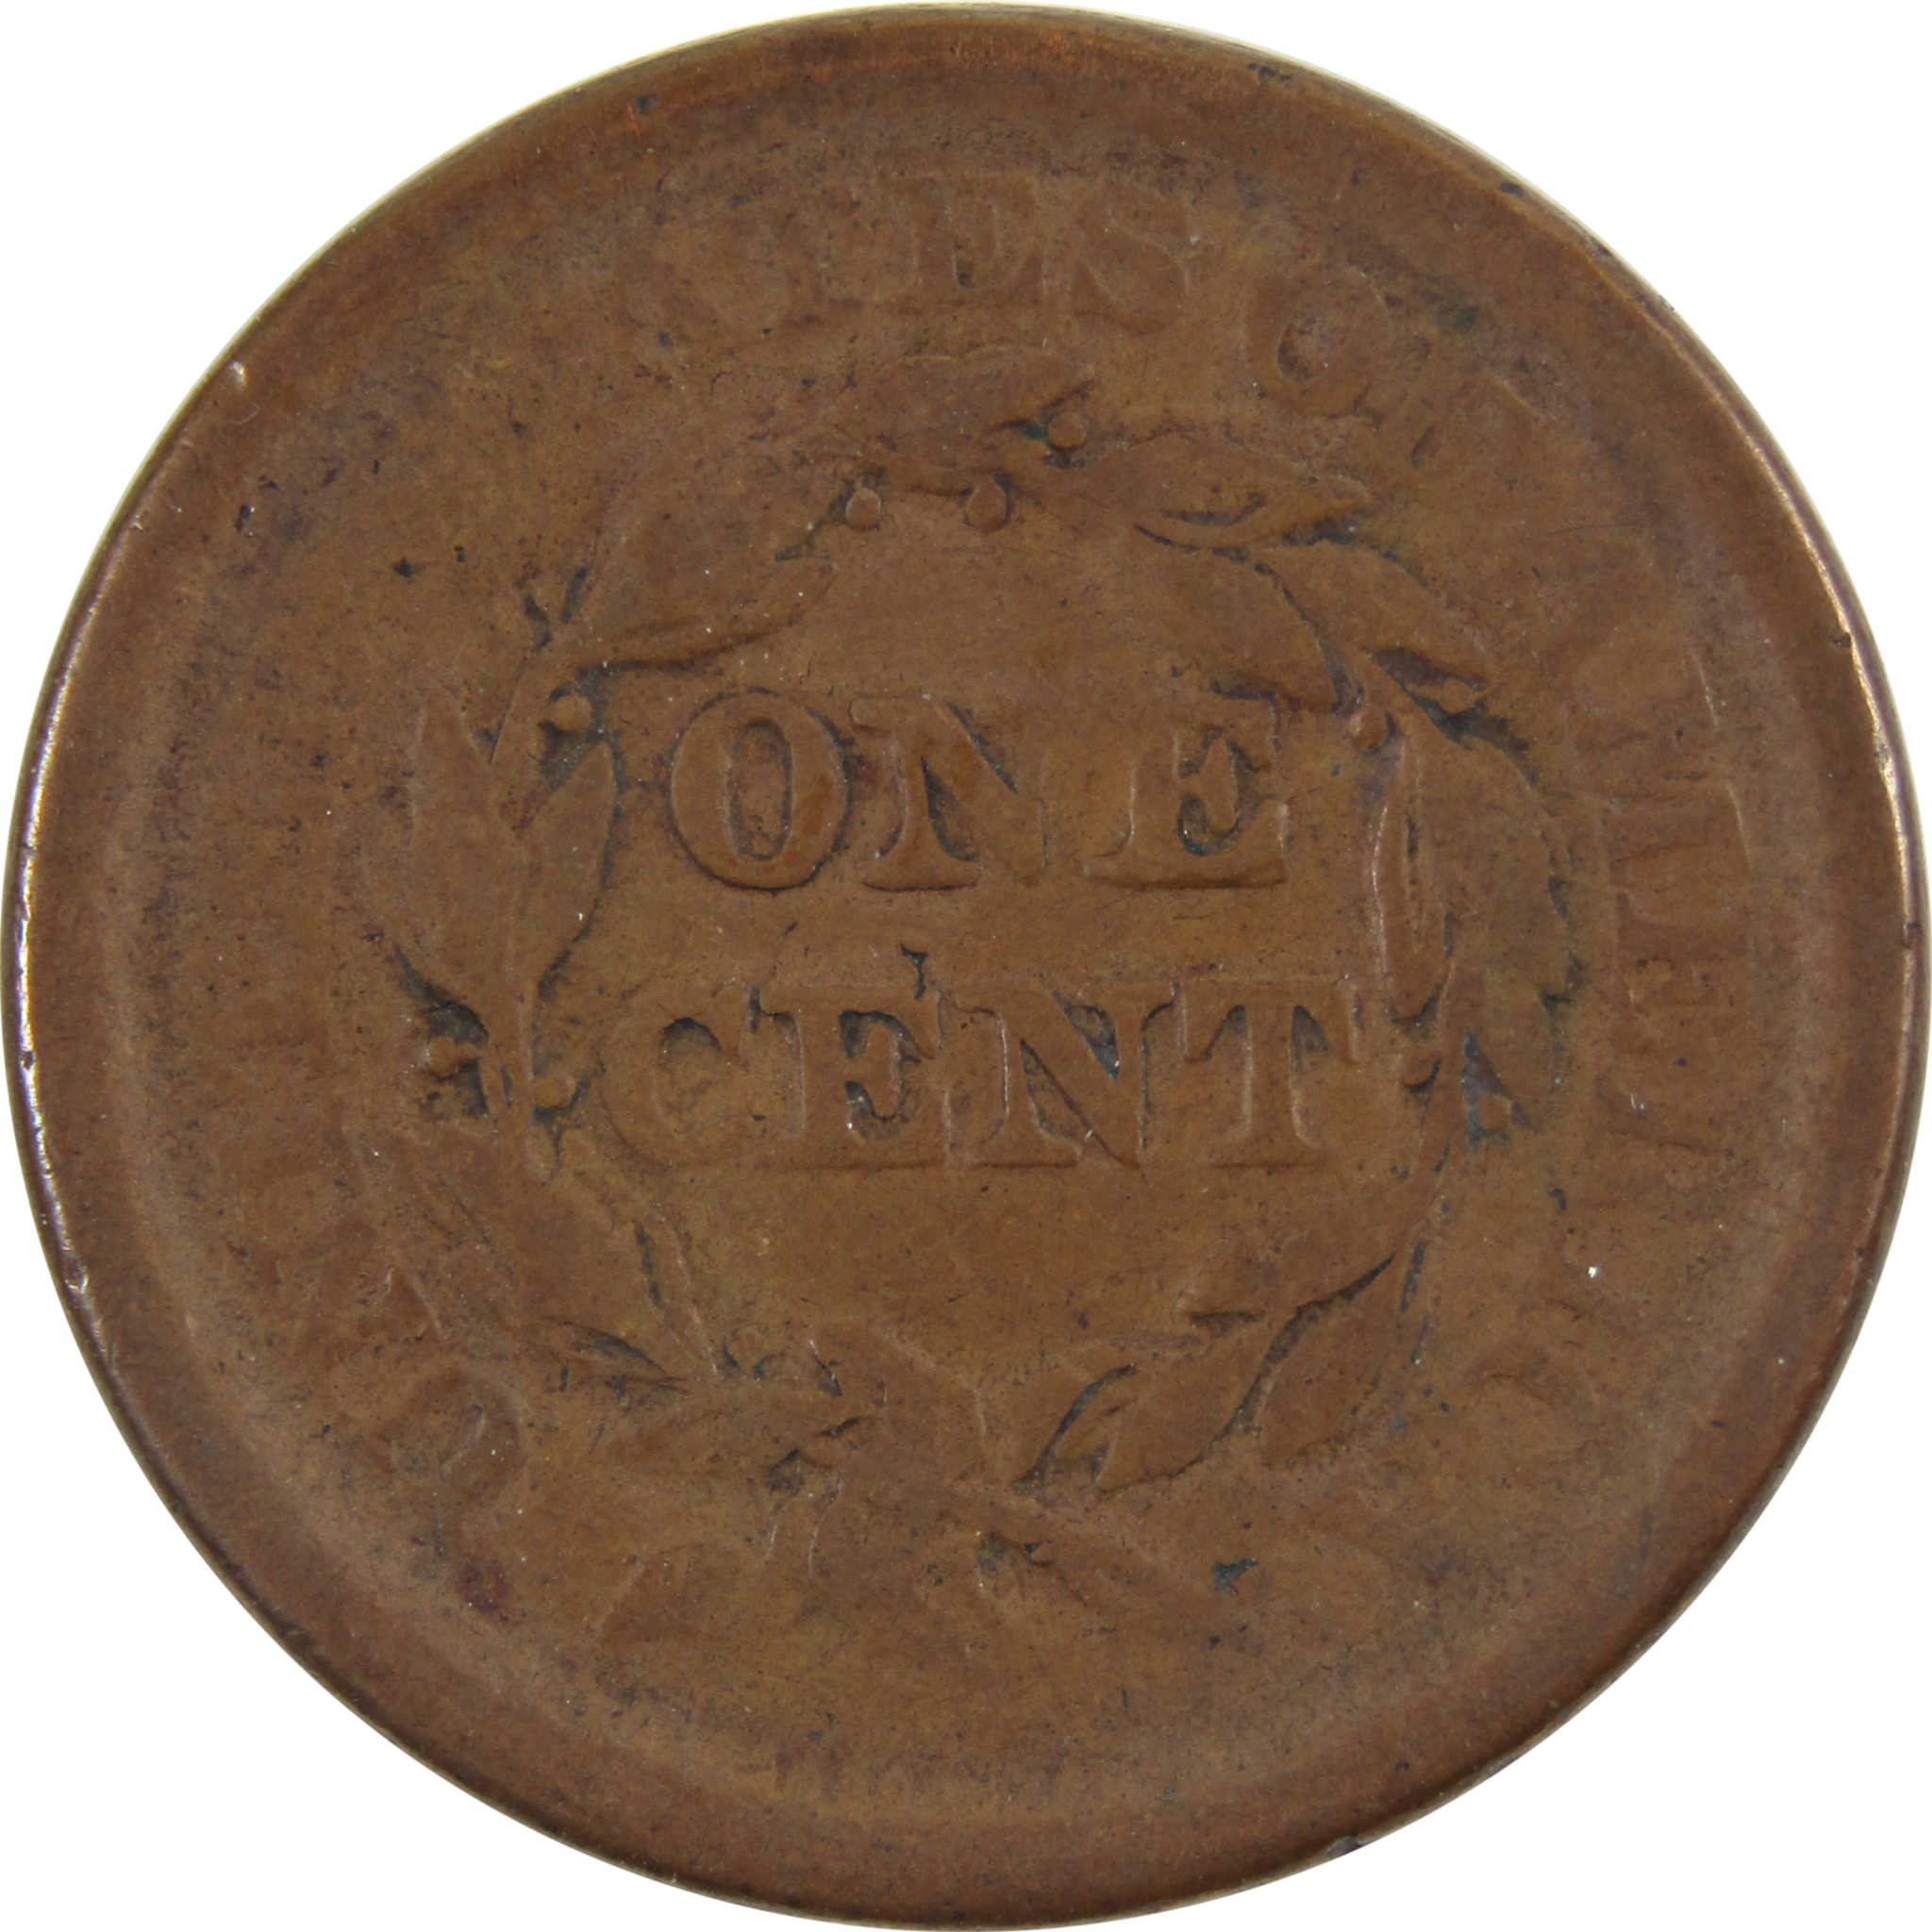 1853 Braided Hair Large Cent F Fine Copper Penny 1c Coin SKU:I8205